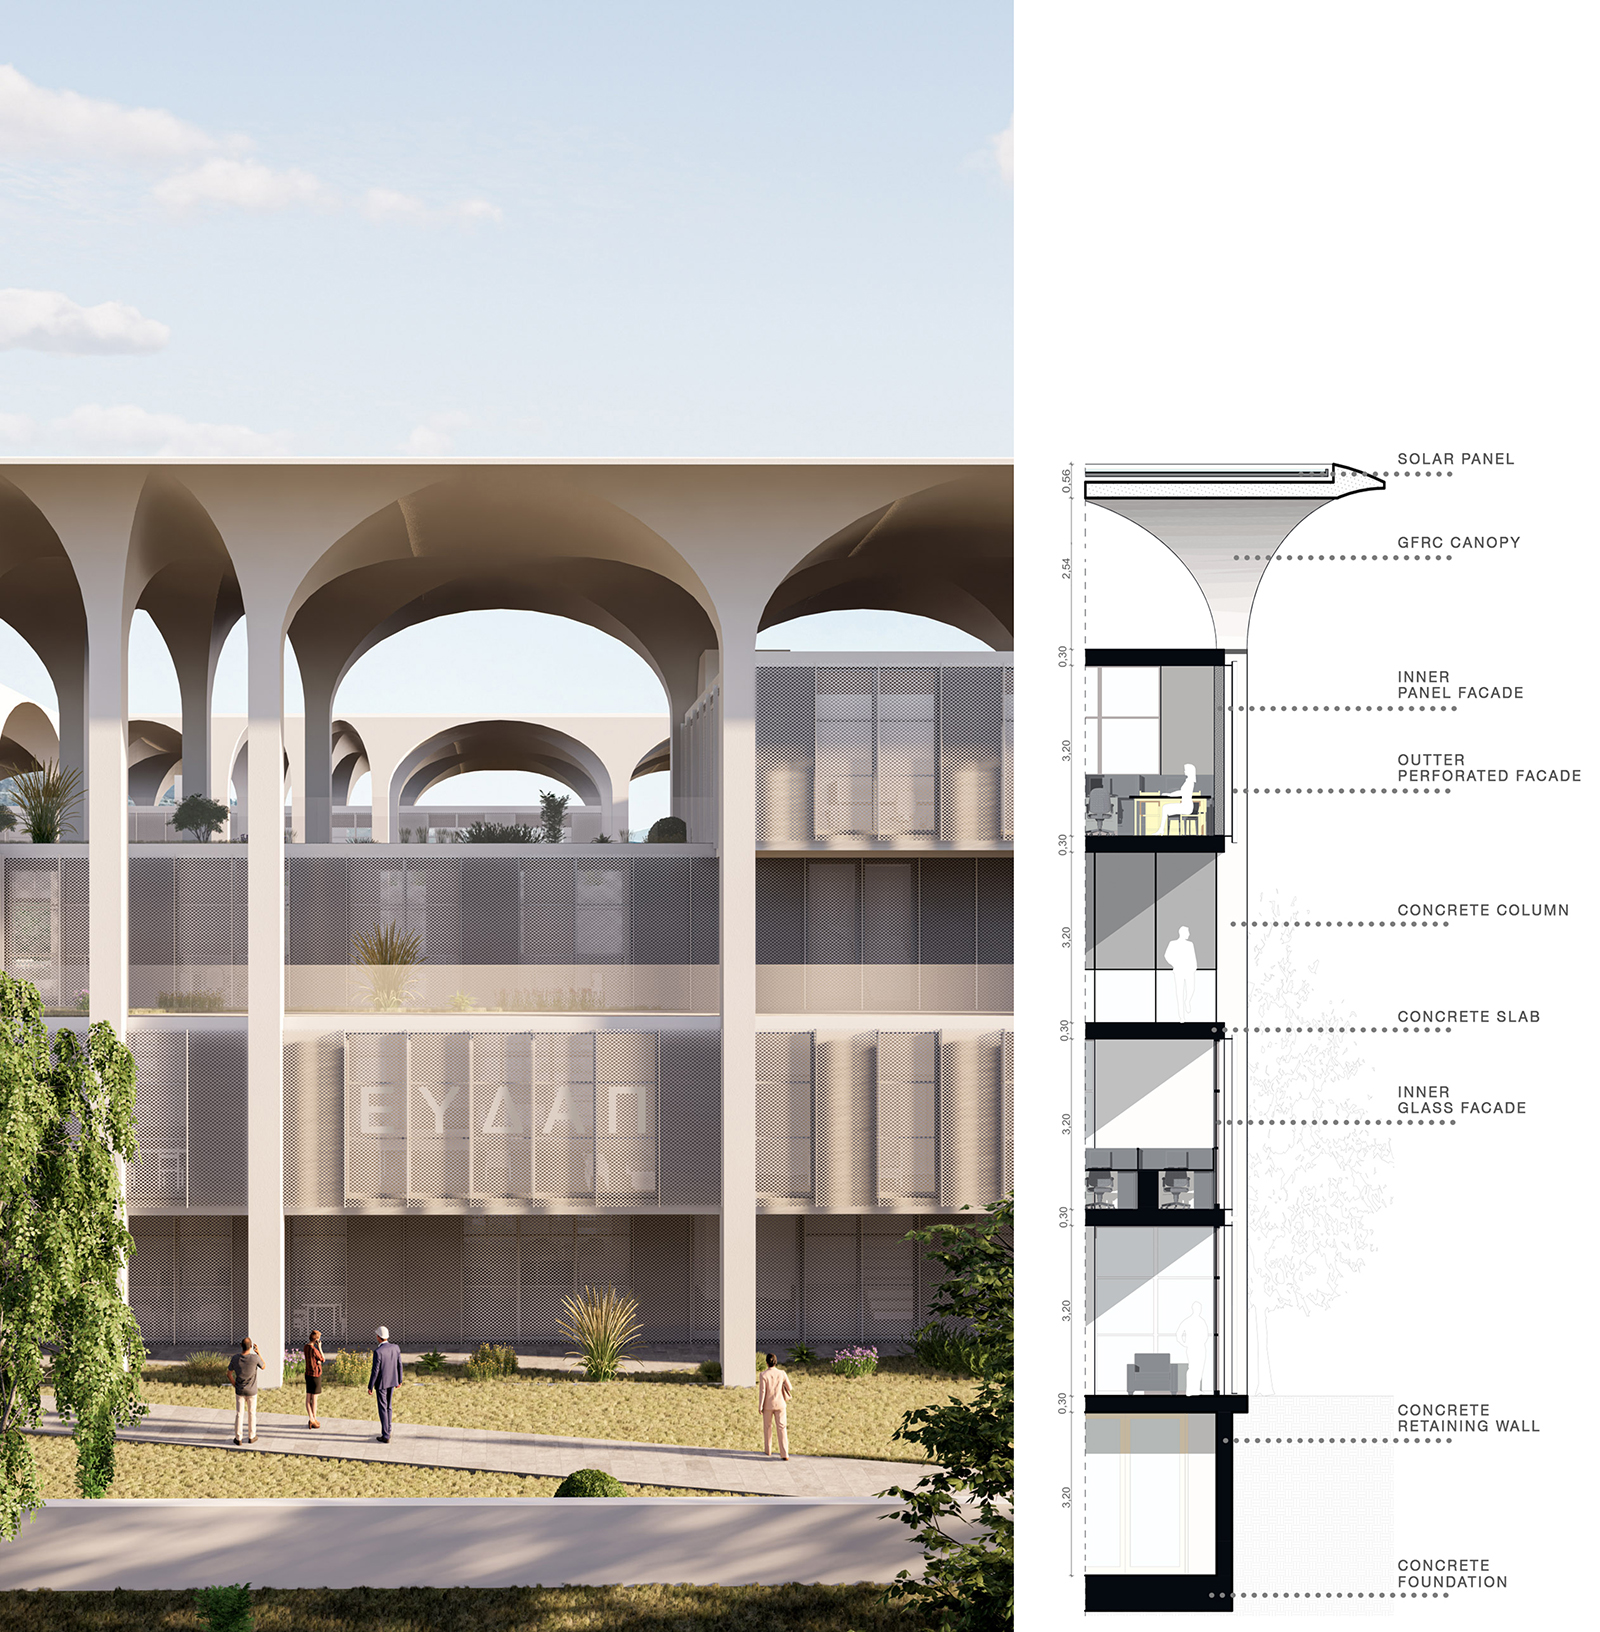 Archisearch Architectural competition “New EYDAP water supply company headquarters in Galatsi” proposal by PLINTHOS Architects